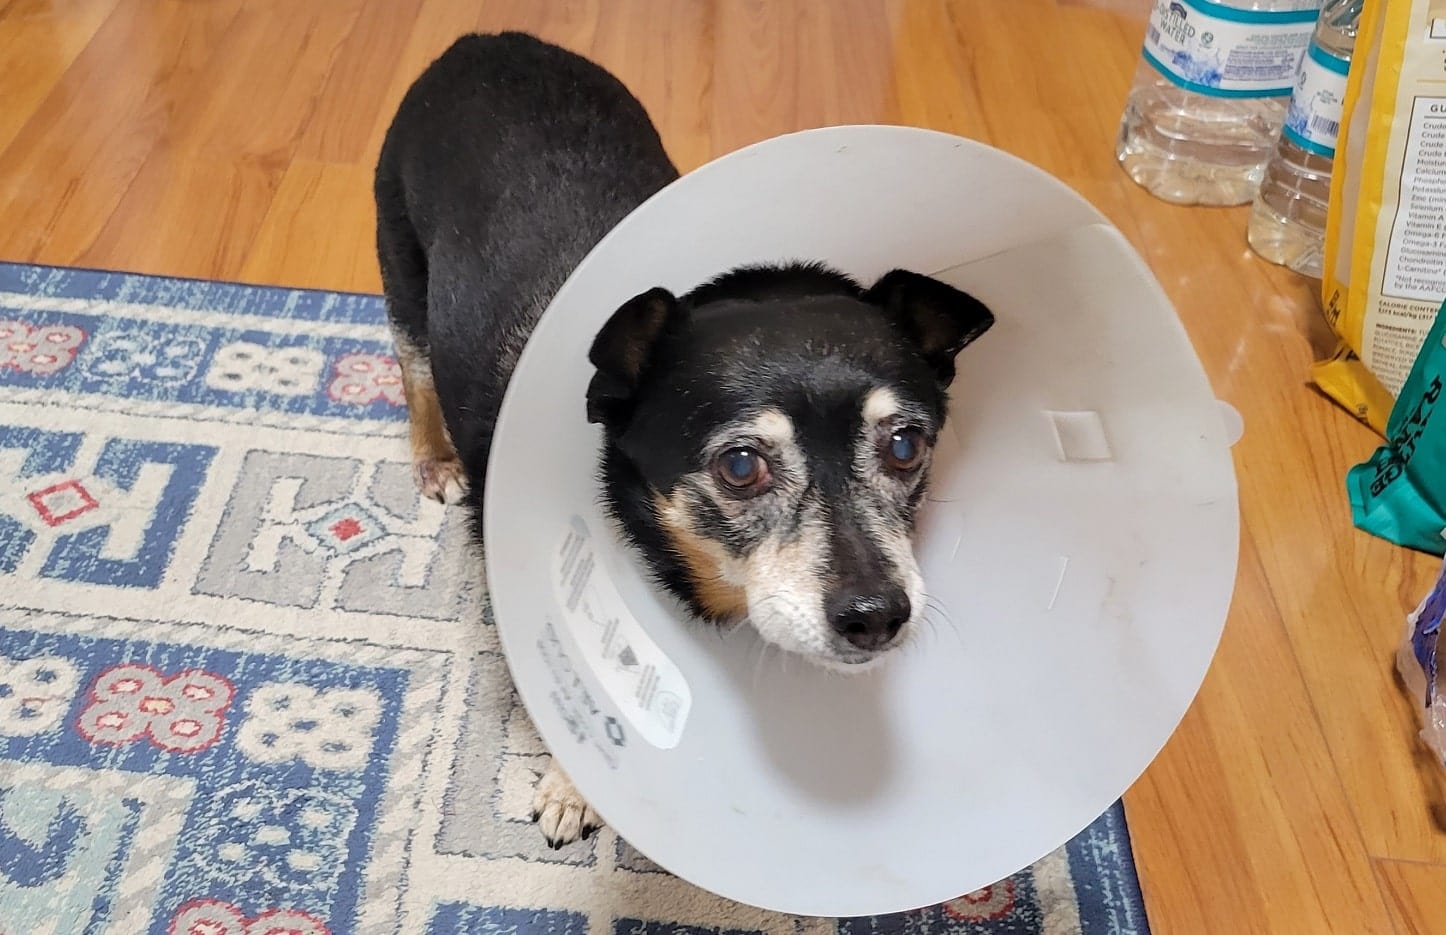 Small dog with a white plastic cone around her head and neck.